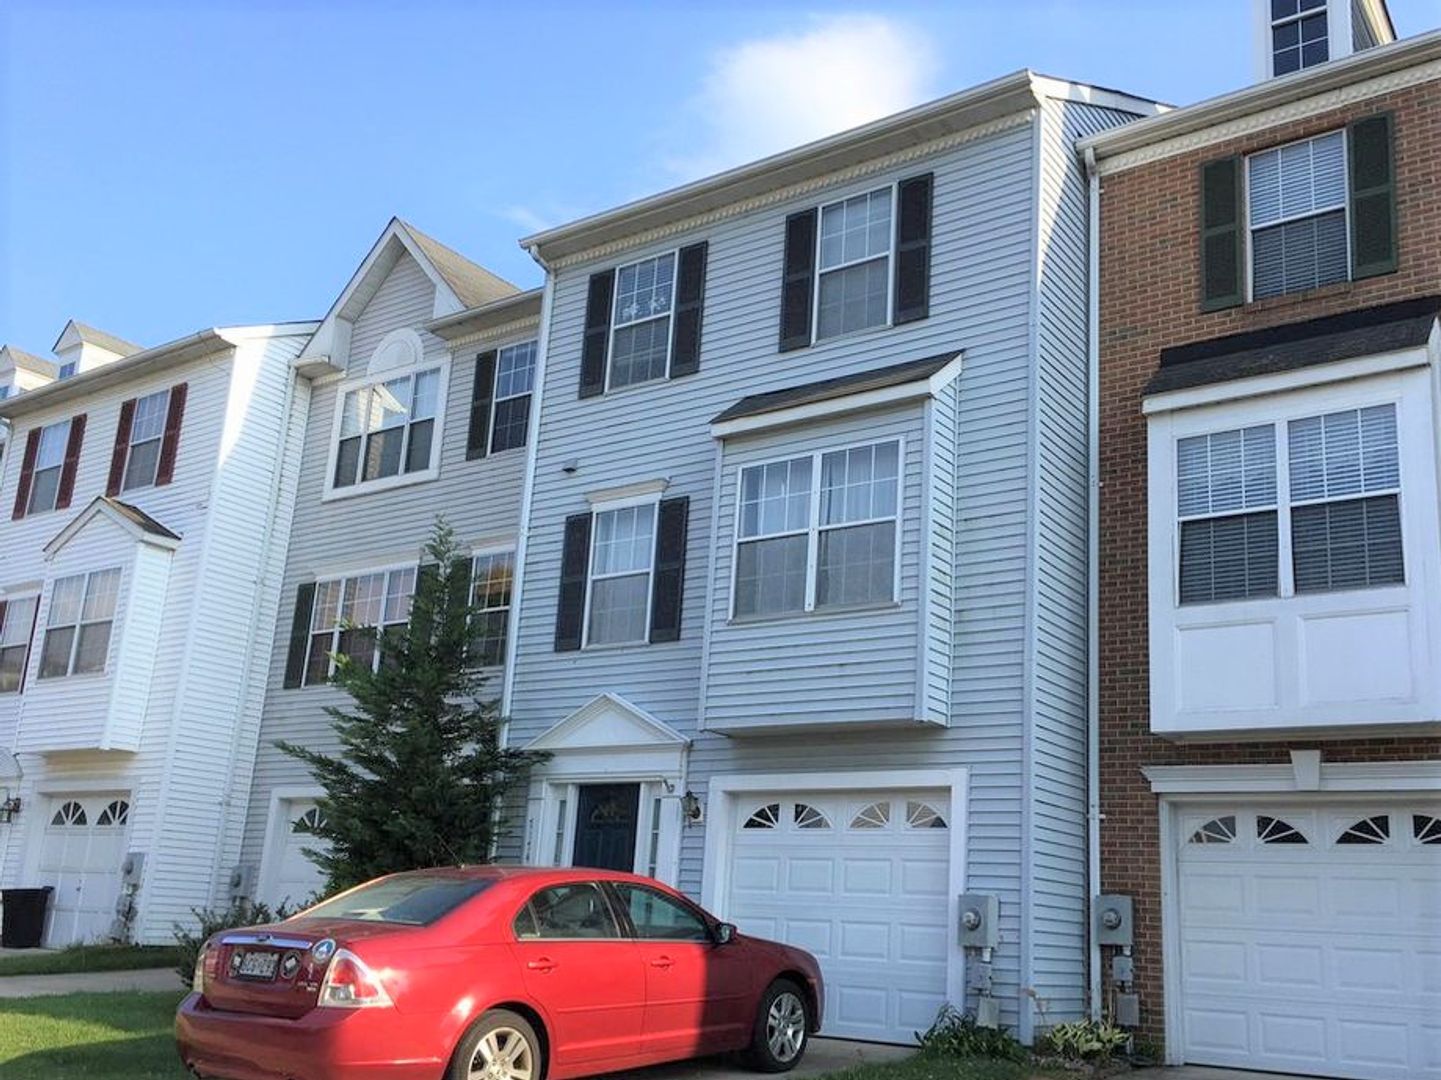 3 Level townhouse in established Frederick neighborhood available mid May!